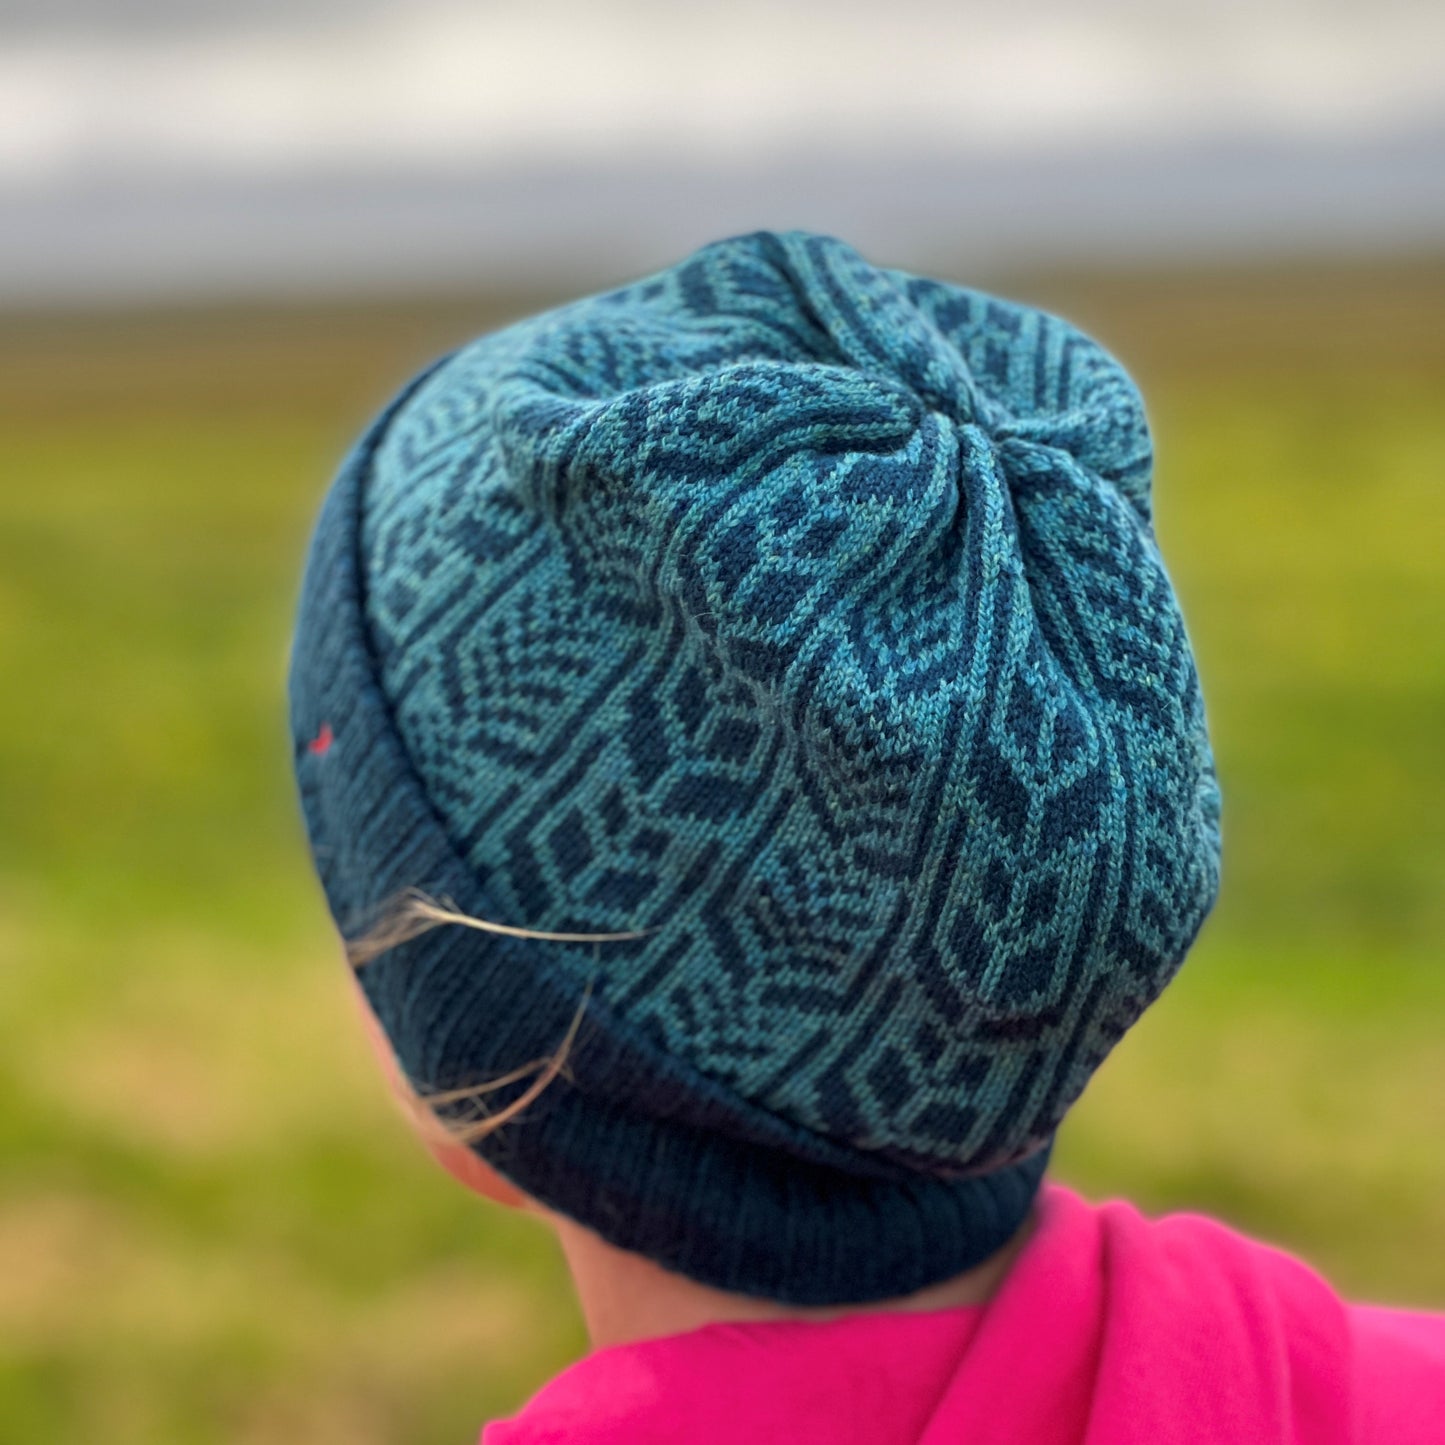 Our knitted woollen hats are made from the finest Merino lamb’s wool, seen here in Ocean.